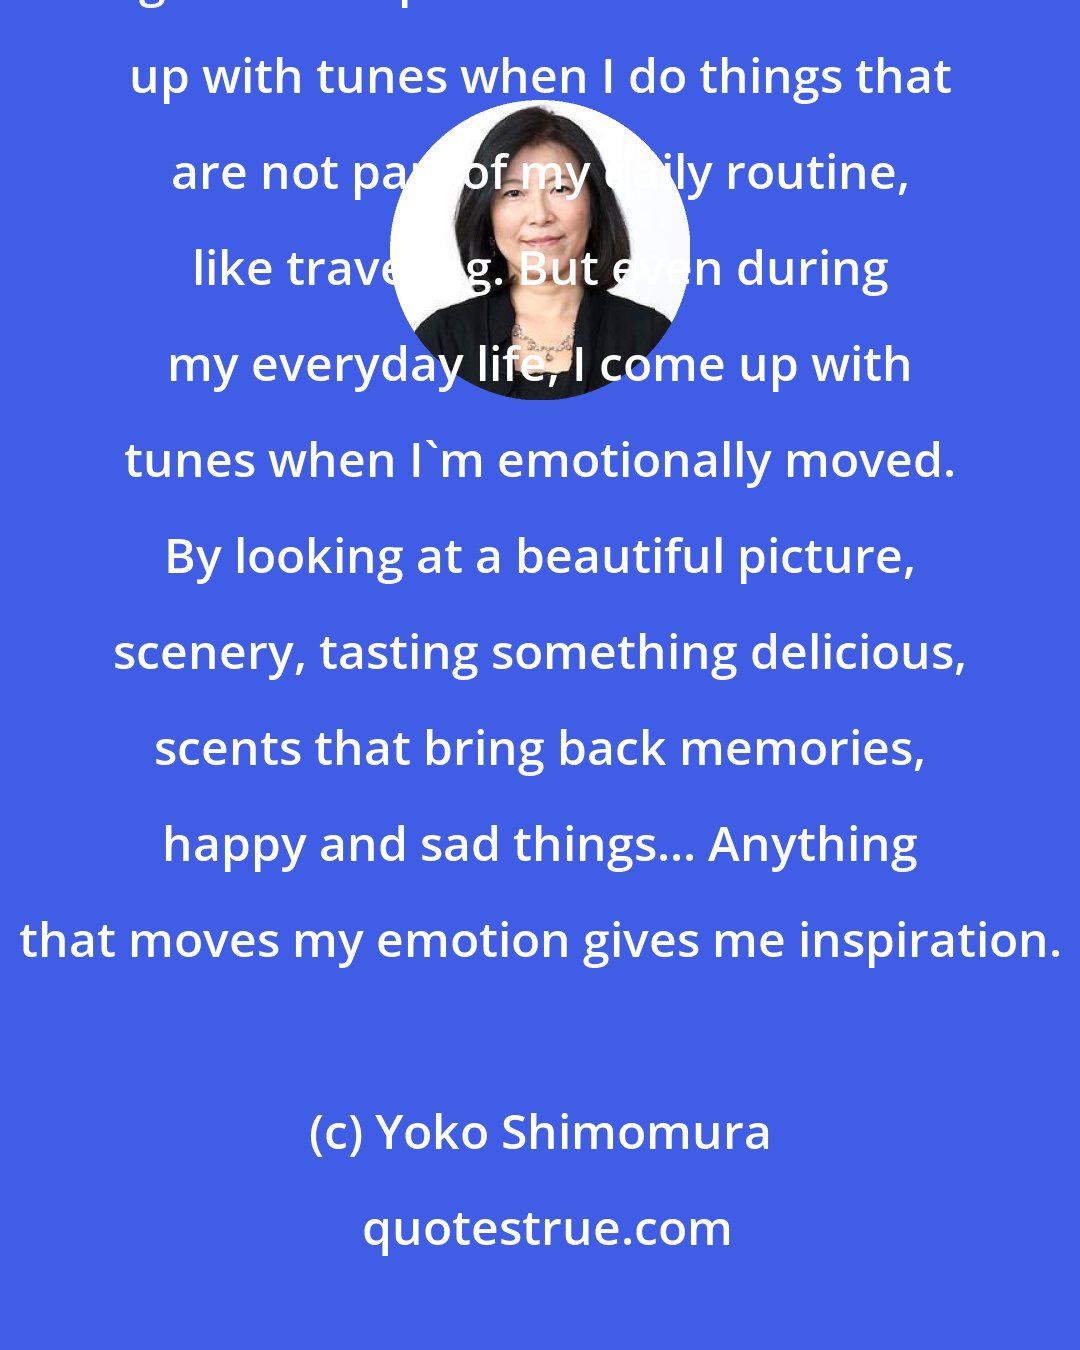 Yoko Shimomura: There isn't one thing in particular; rather, a lot of different things give me inspiration. I tend to come up with tunes when I do things that are not part of my daily routine, like traveling. But even during my everyday life, I come up with tunes when I'm emotionally moved. By looking at a beautiful picture, scenery, tasting something delicious, scents that bring back memories, happy and sad things... Anything that moves my emotion gives me inspiration.